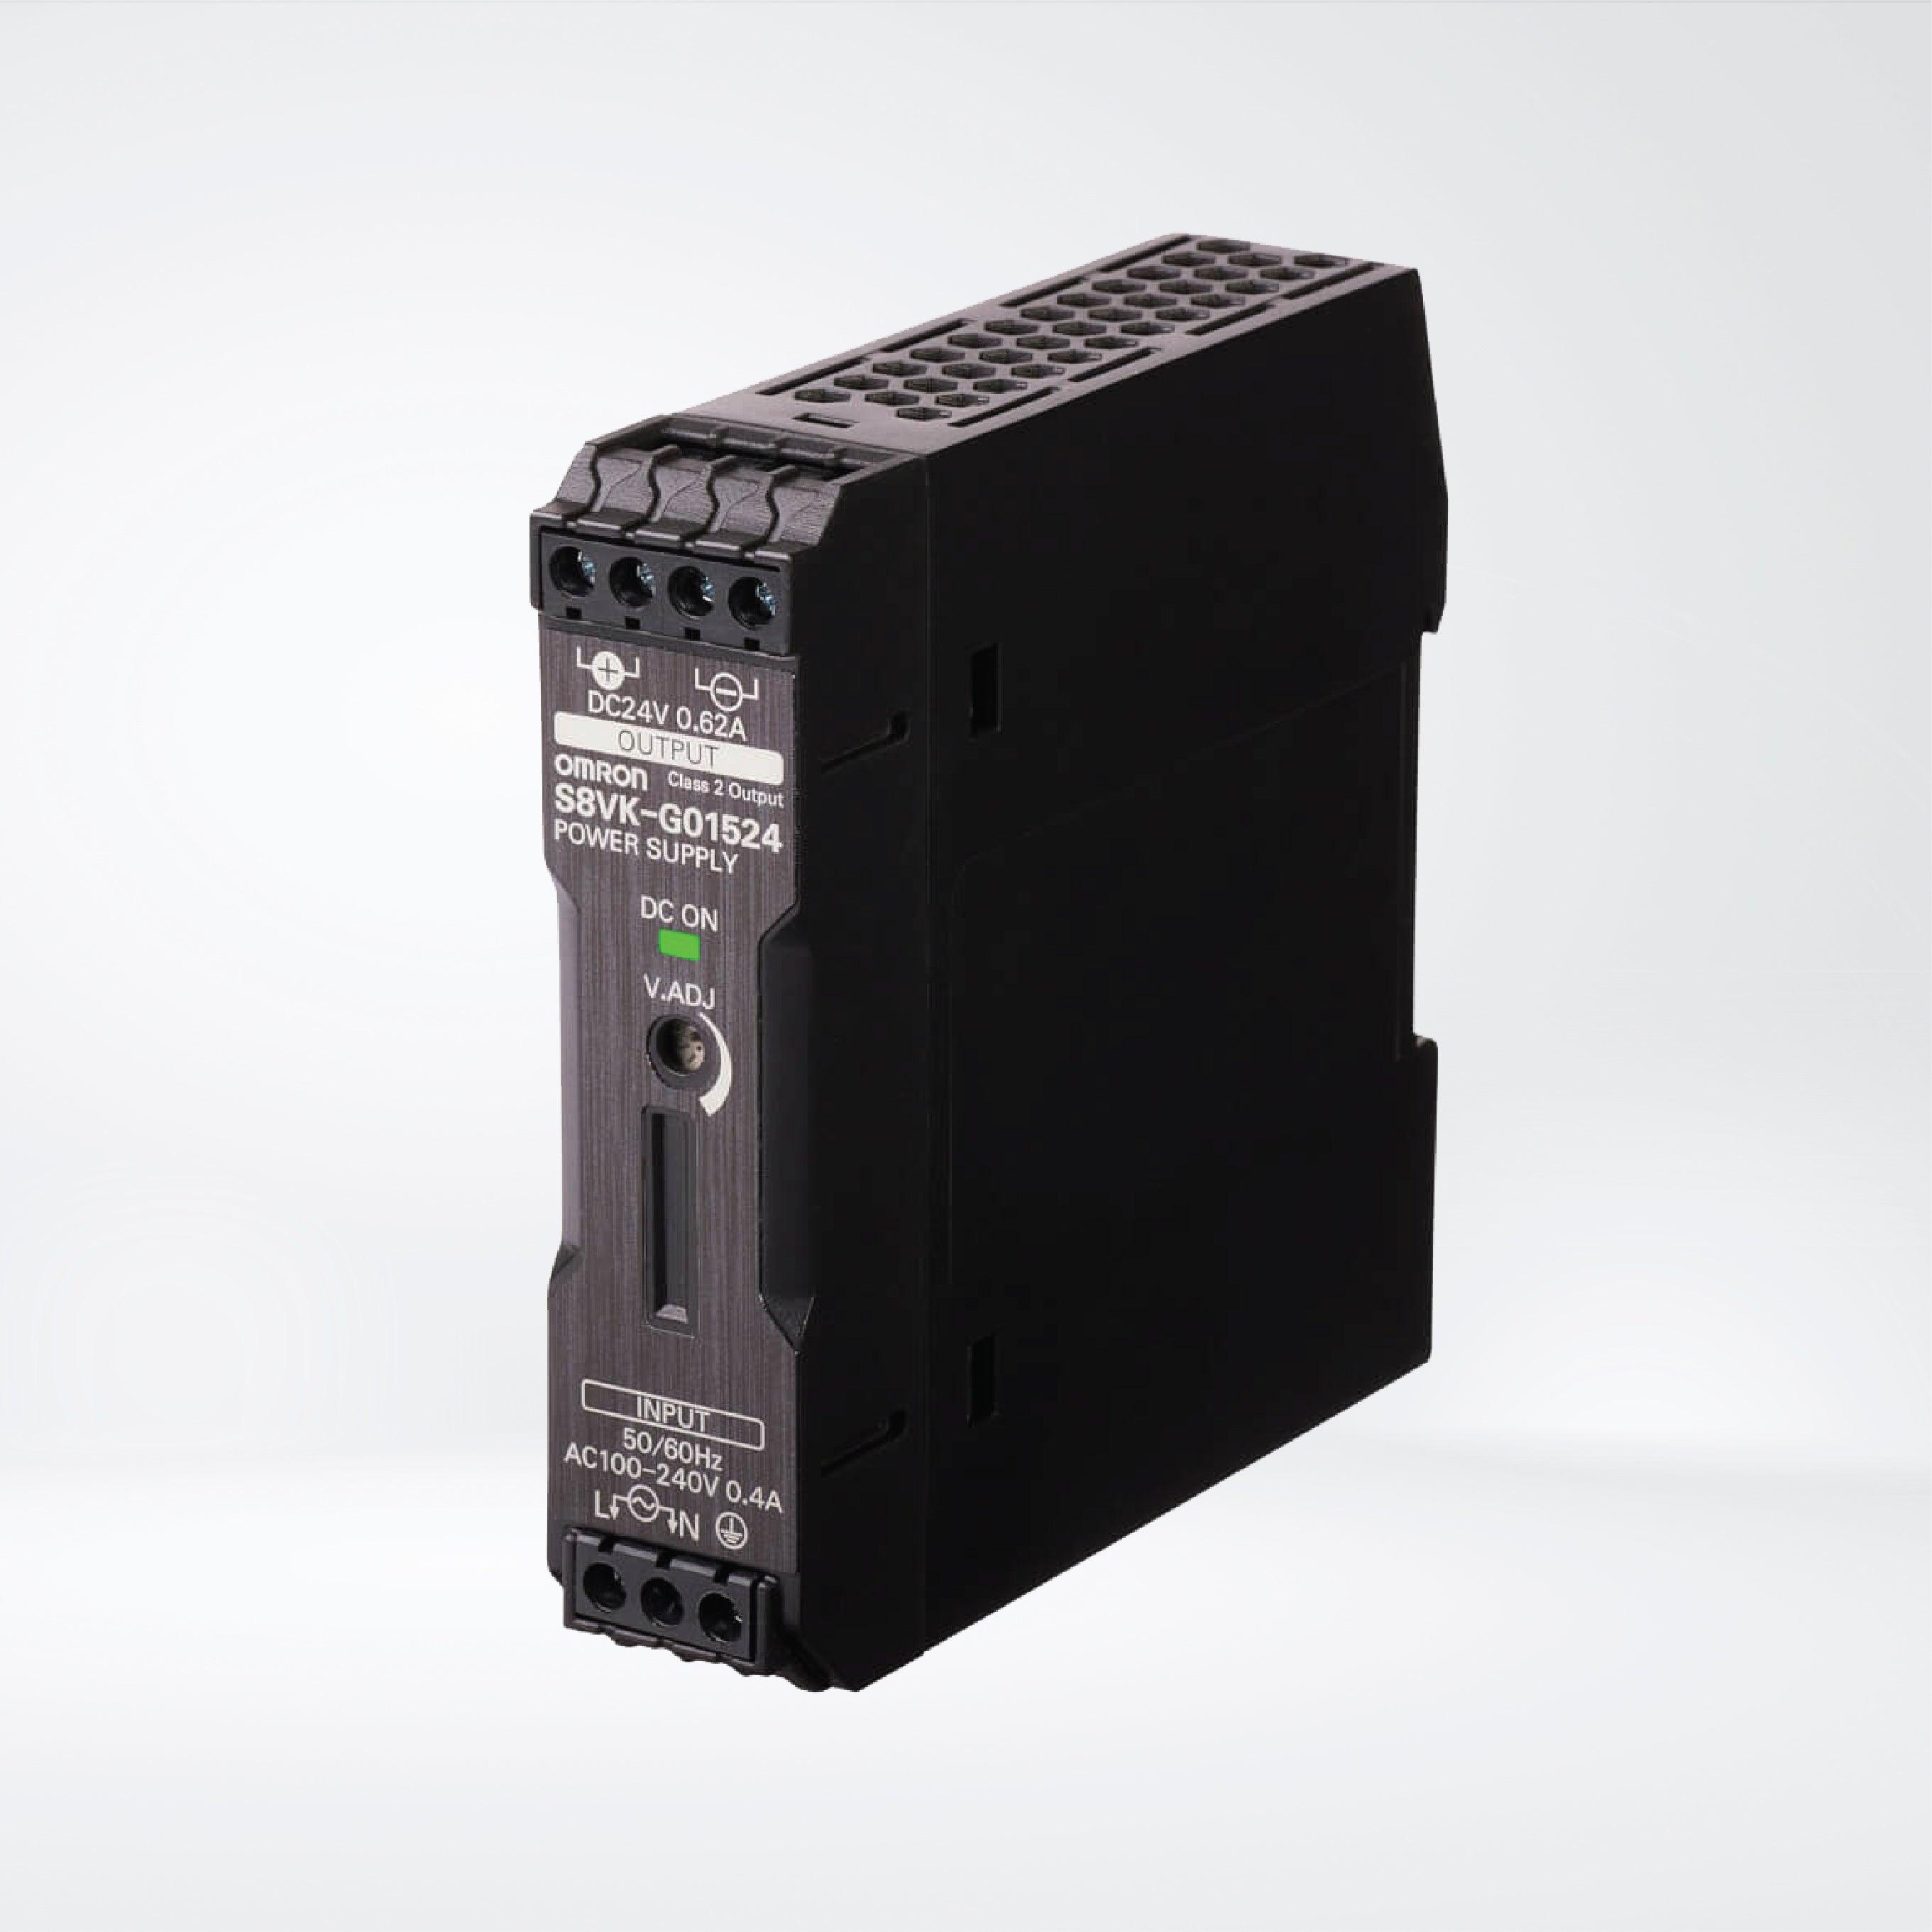 S8VK-G01505 Switch Mode Power Supply , 15W , 5VDC , standard with single-phase input - Riverplus